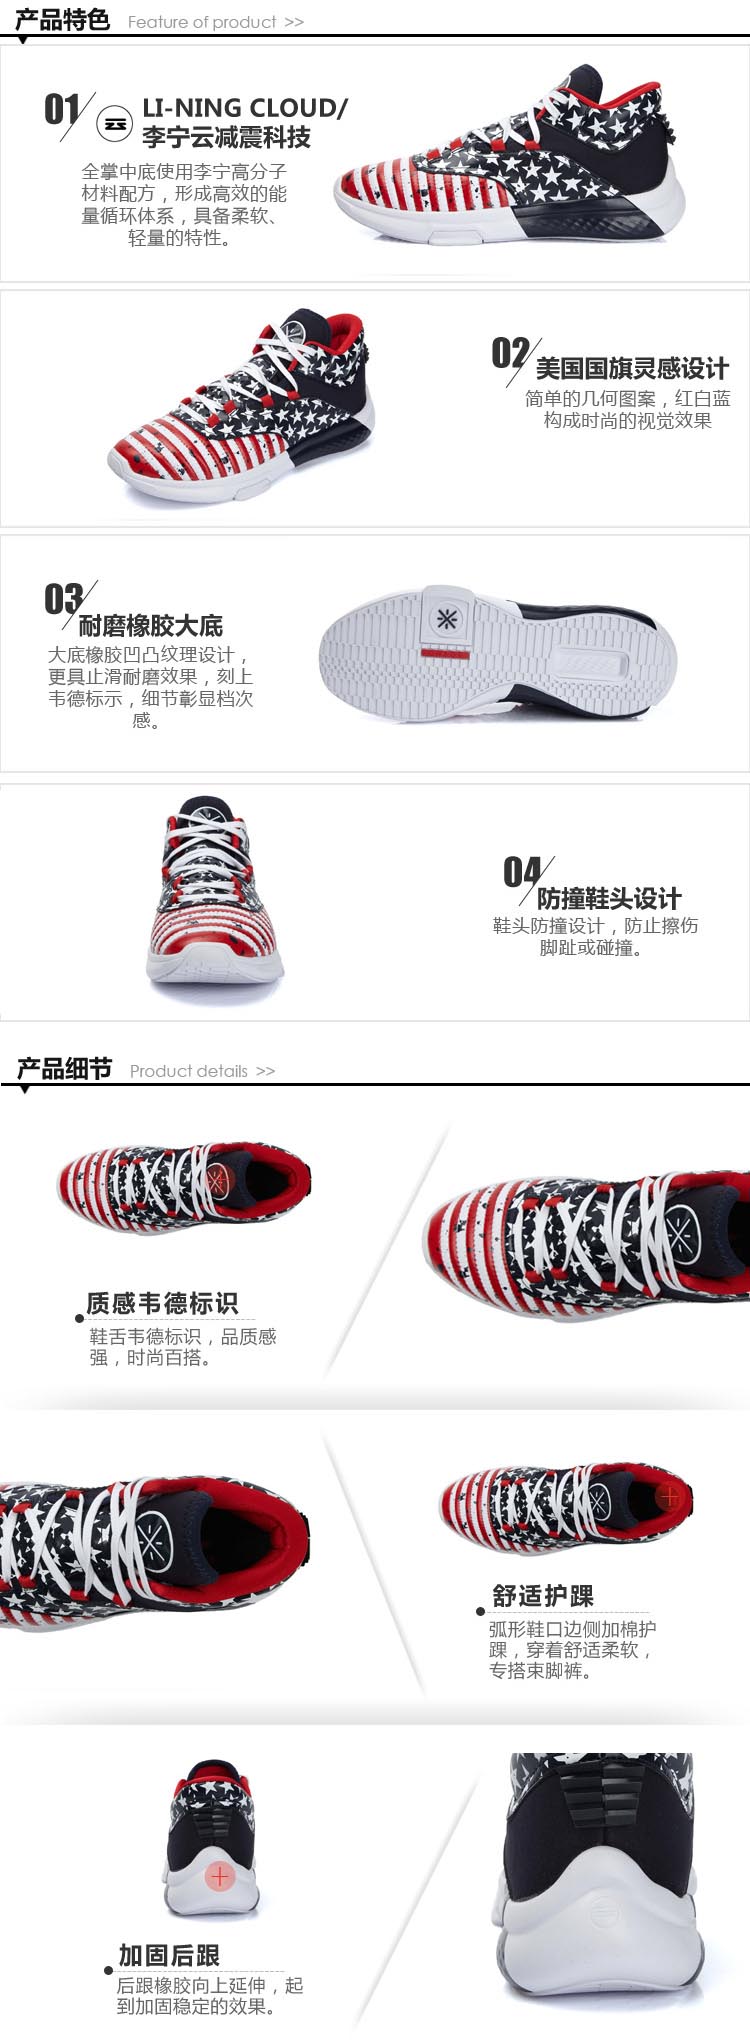 Li Ning Wade 2016 Spring New Basketball Culture Shoes - Ink blue/Red/White